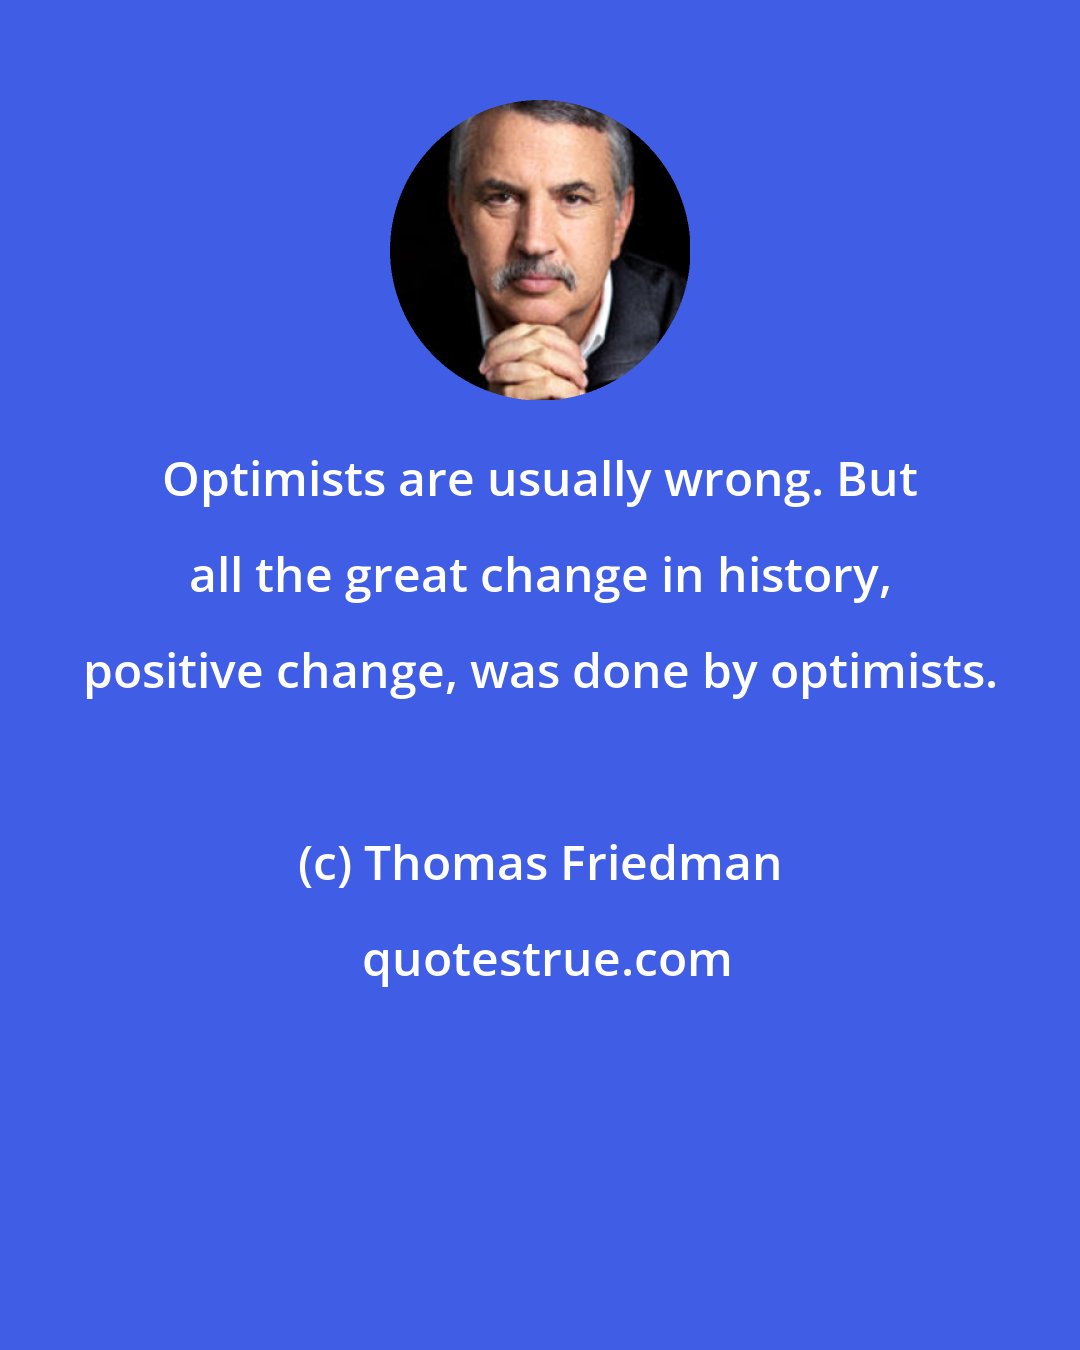 Thomas Friedman: Optimists are usually wrong. But all the great change in history, positive change, was done by optimists.